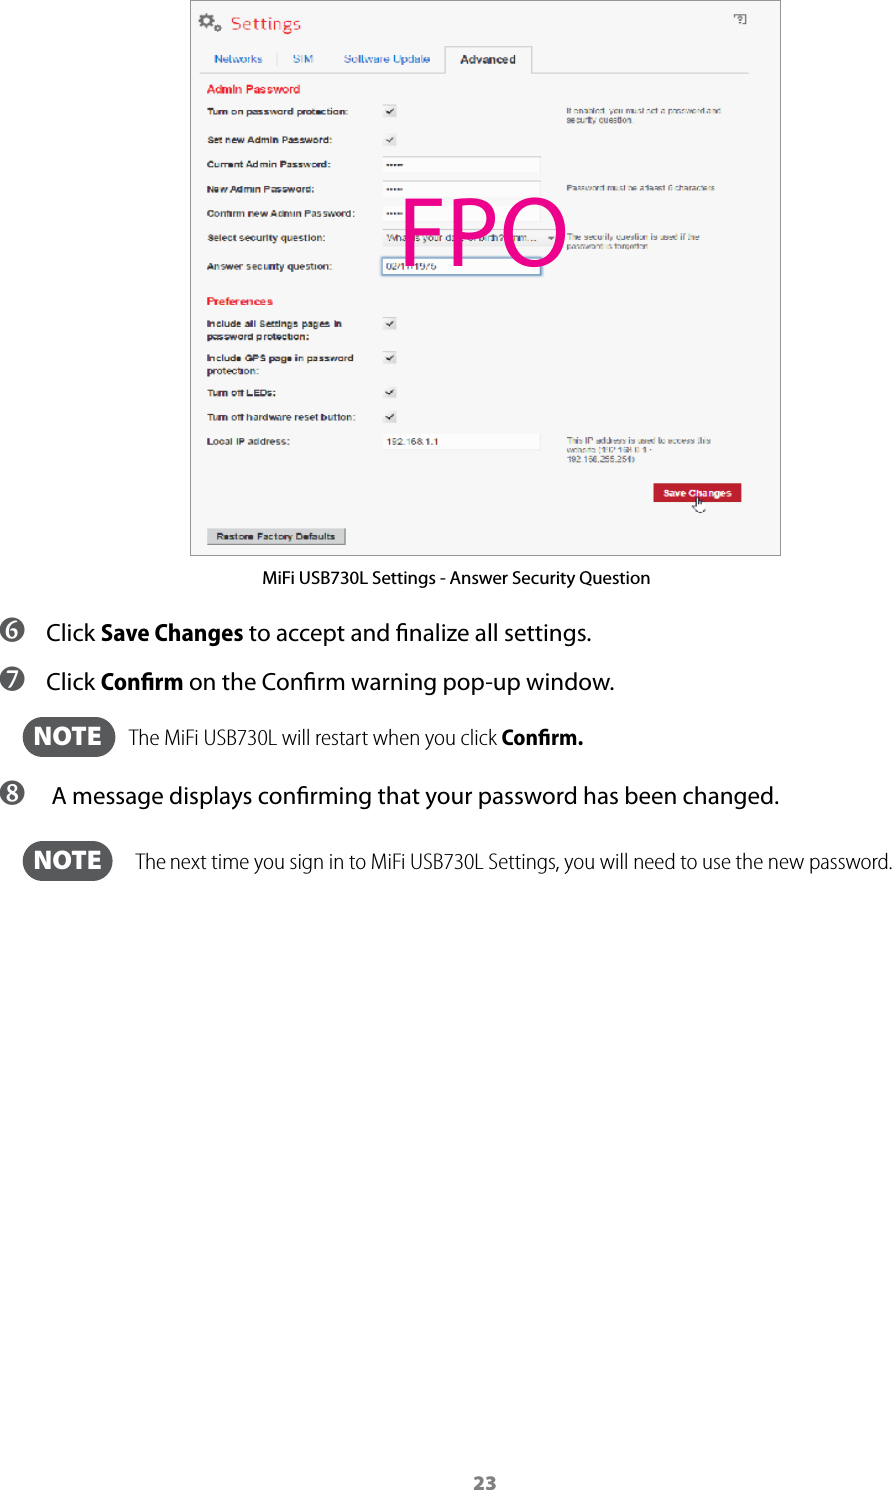 23MiFi USB730L Settings - Answer Security Question ➏ Click Save Changes to accept and nalize all settings.  ➐ Click Conﬁrm on the Conrm warning pop-up window.  NOTE    The MiFi USB730L will restart when you click Conﬁrm. ➑  A message displays conrming that your password has been changed.  NOTE   The next time you sign in to MiFi USB730L Settings, you will need to use the new password.FPO